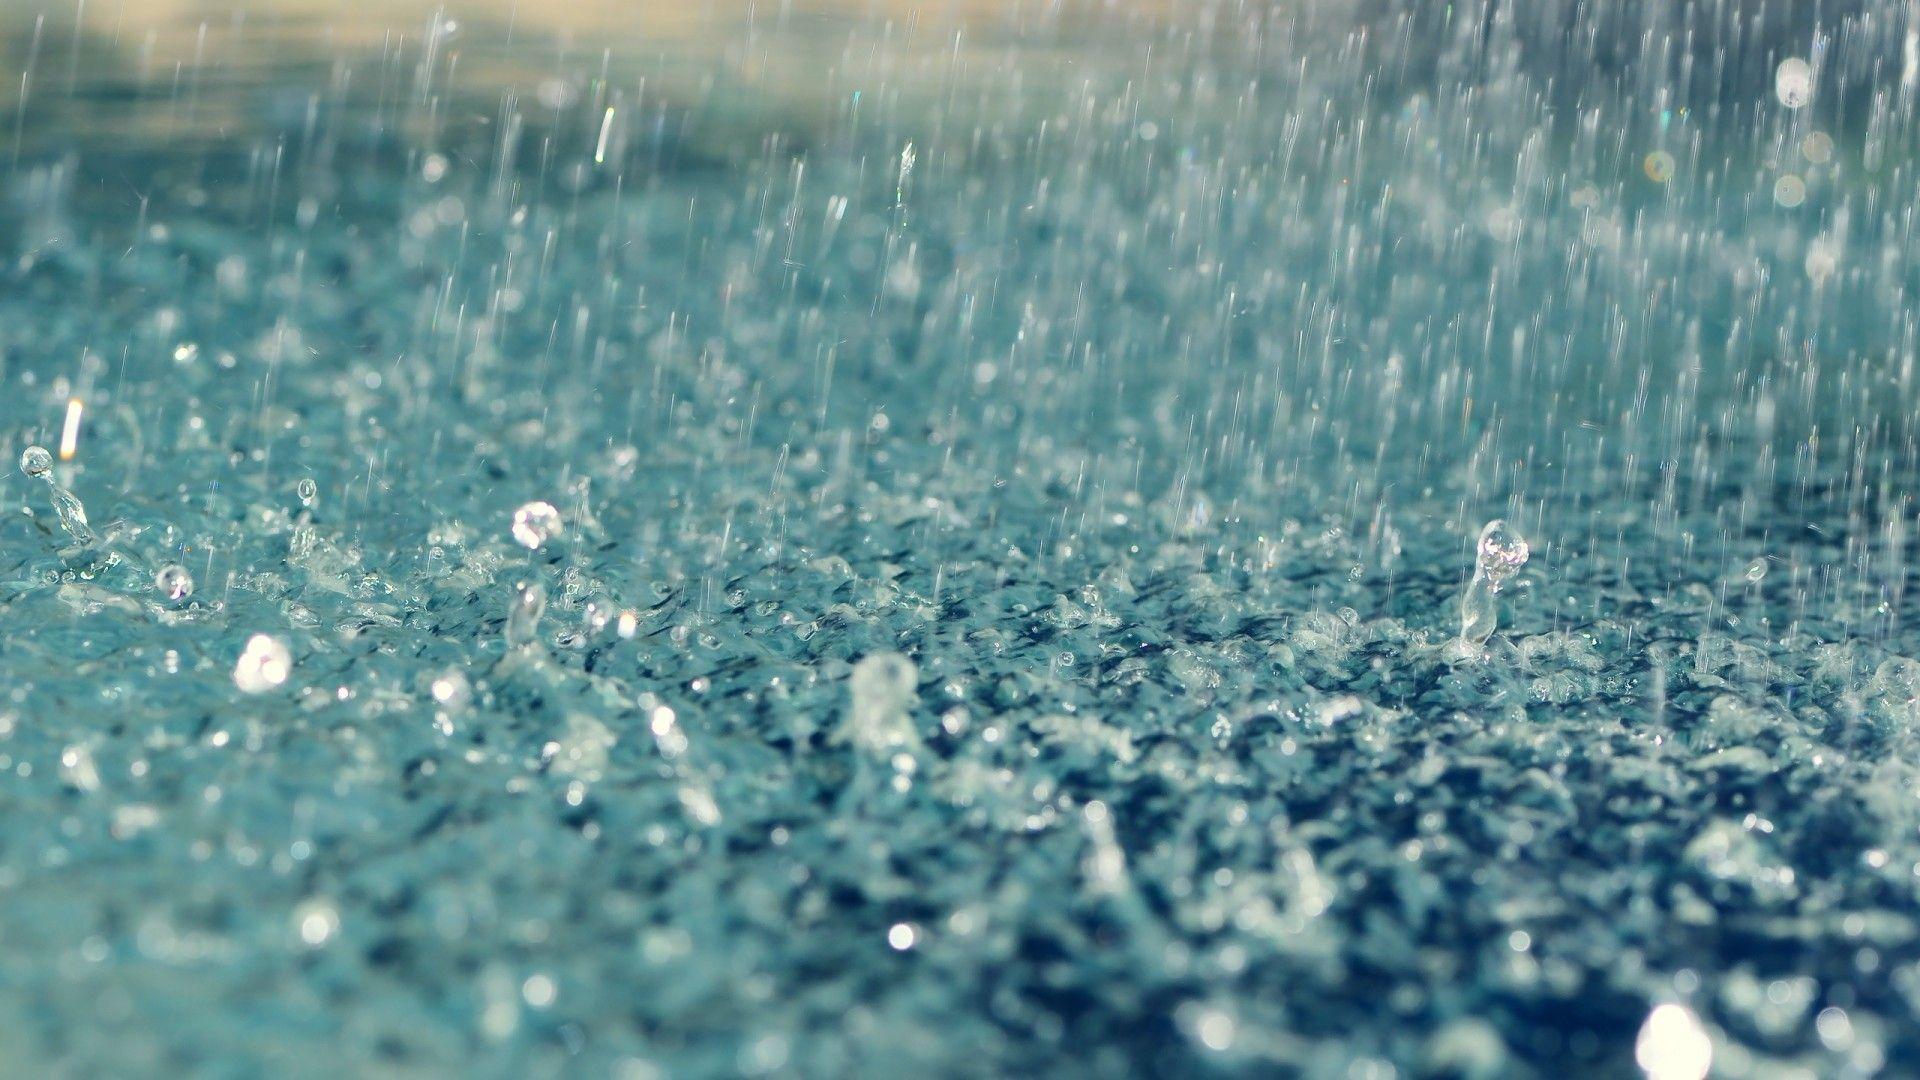 Rain full hd hdtv fhd 1080p wallpapers hd desktop backgrounds  1920x1080 images and pictures